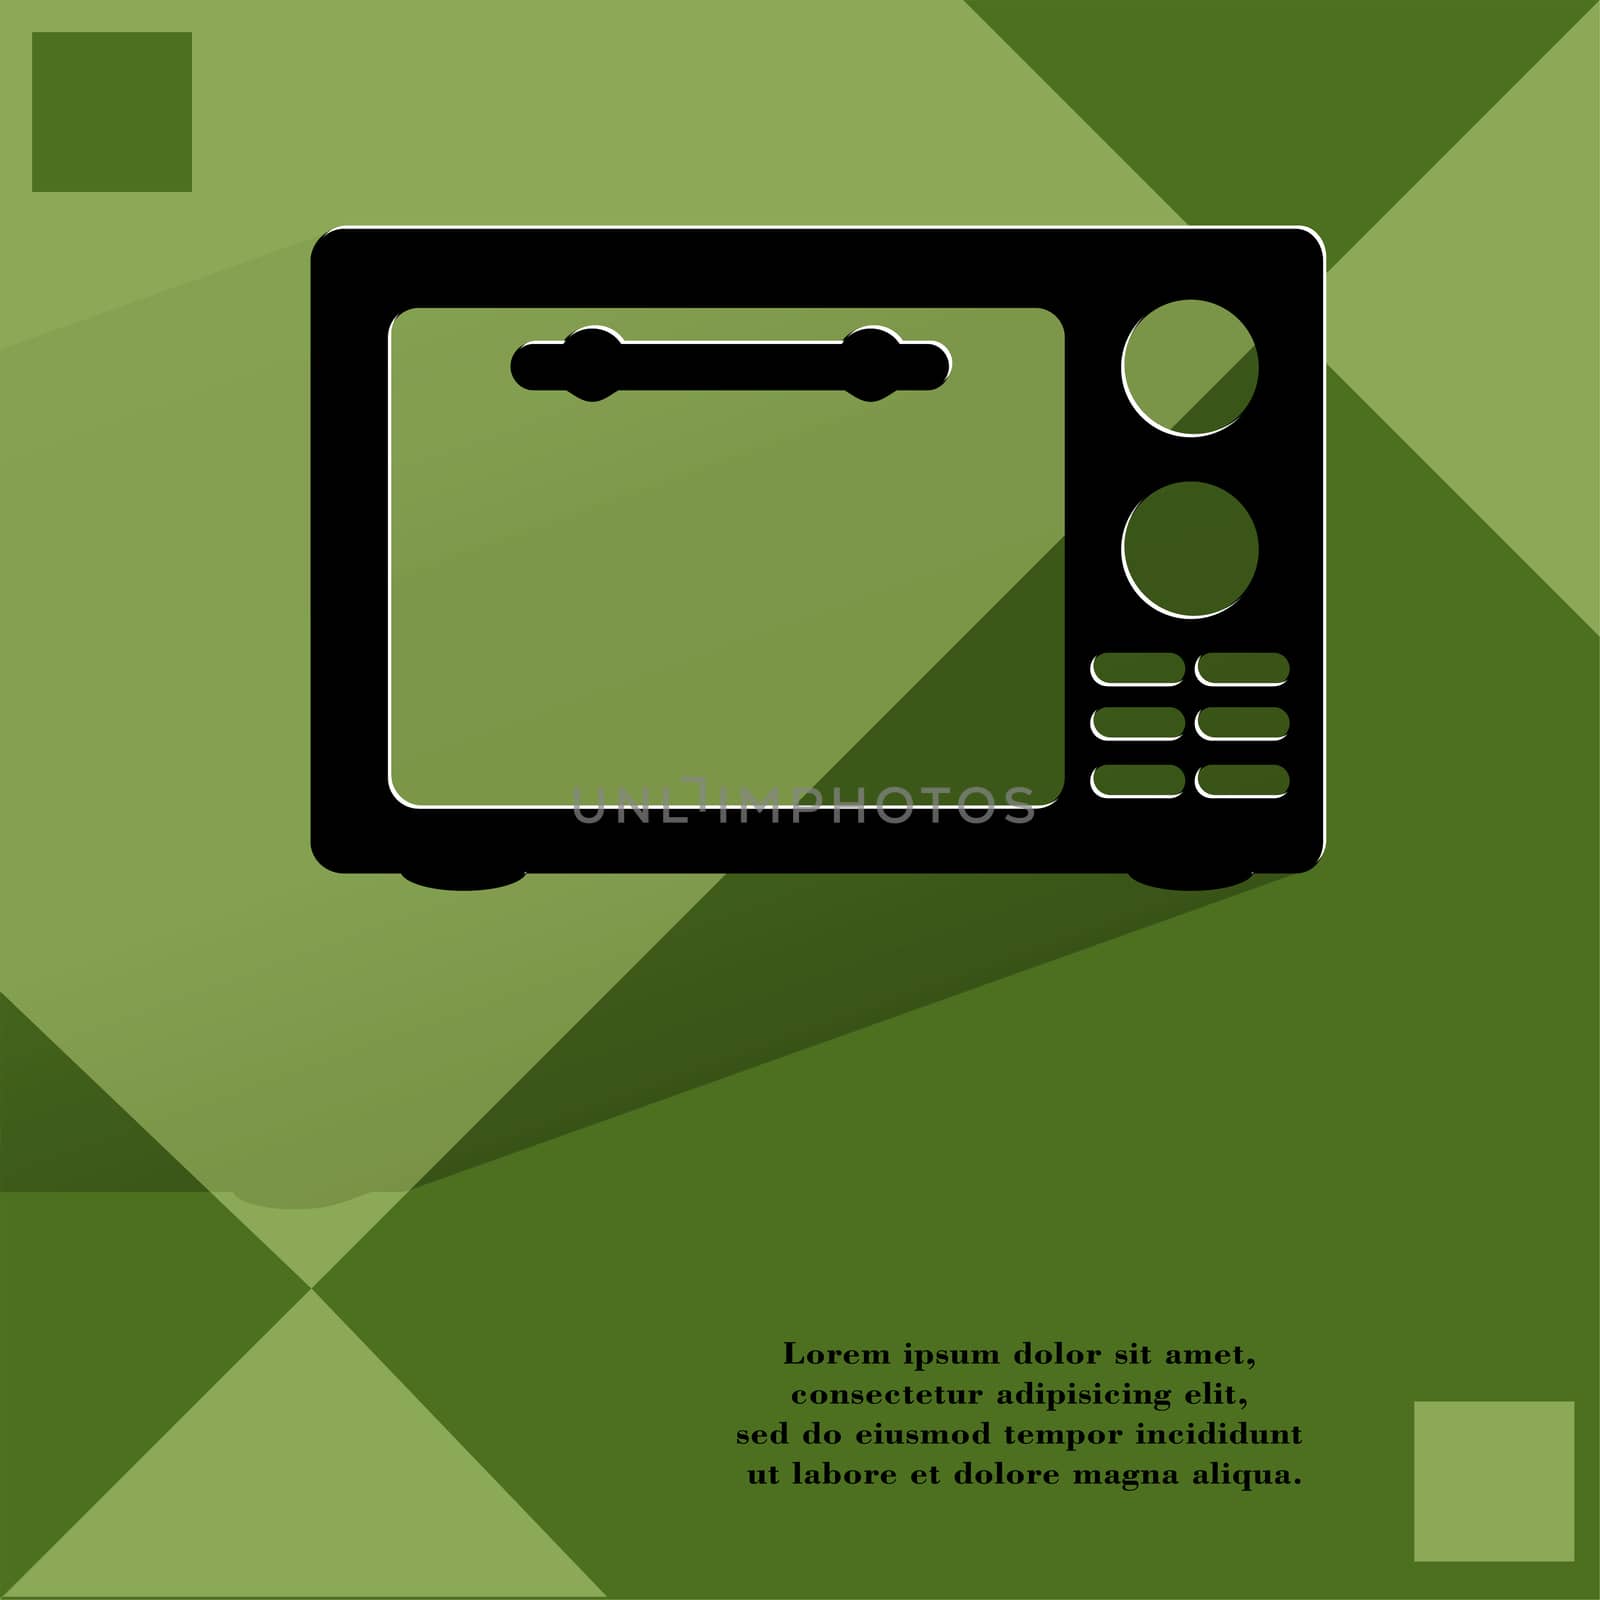 microwave. kitchen equipment Flat modern web button  on a flat geometric abstract background. . 